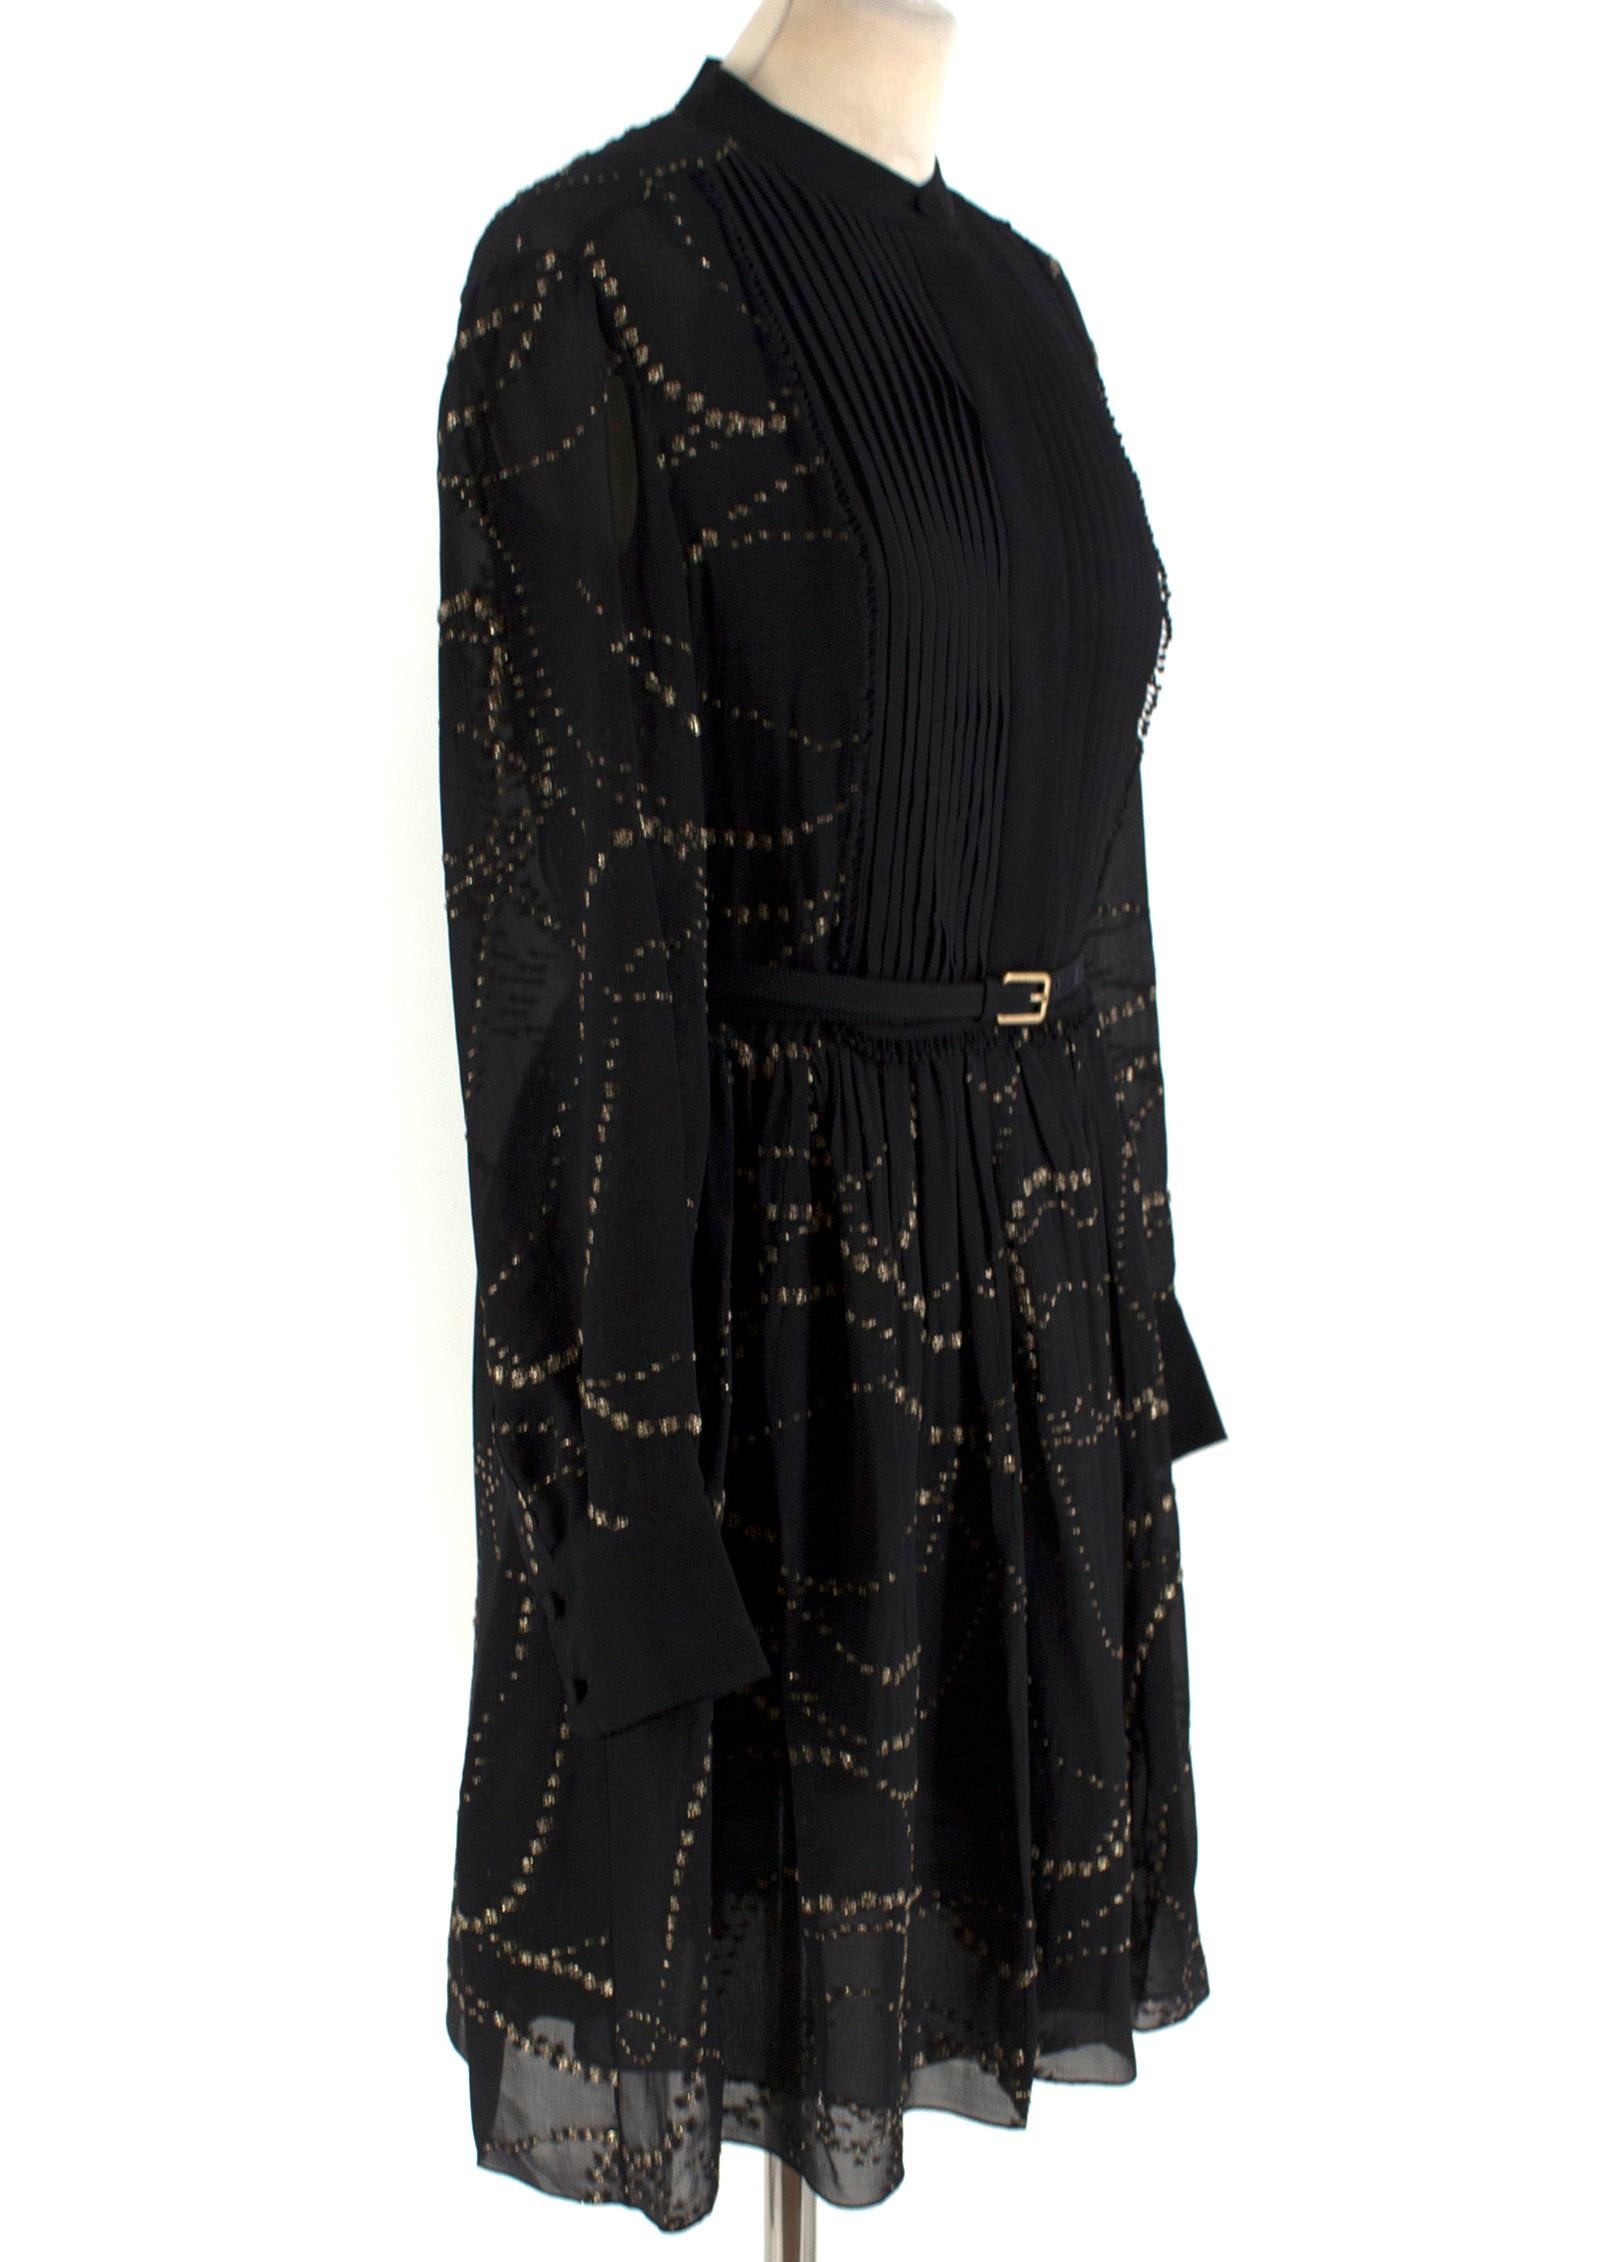 Chloe Black Silk Belted Dress

-Black mini dress with long sleeves
-Pleated detailing at the bust
-Gold stitched pattern
-Button closure
-Comes with belt

Please note, these items are pre-owned and may show signs of being stored even when unworn and